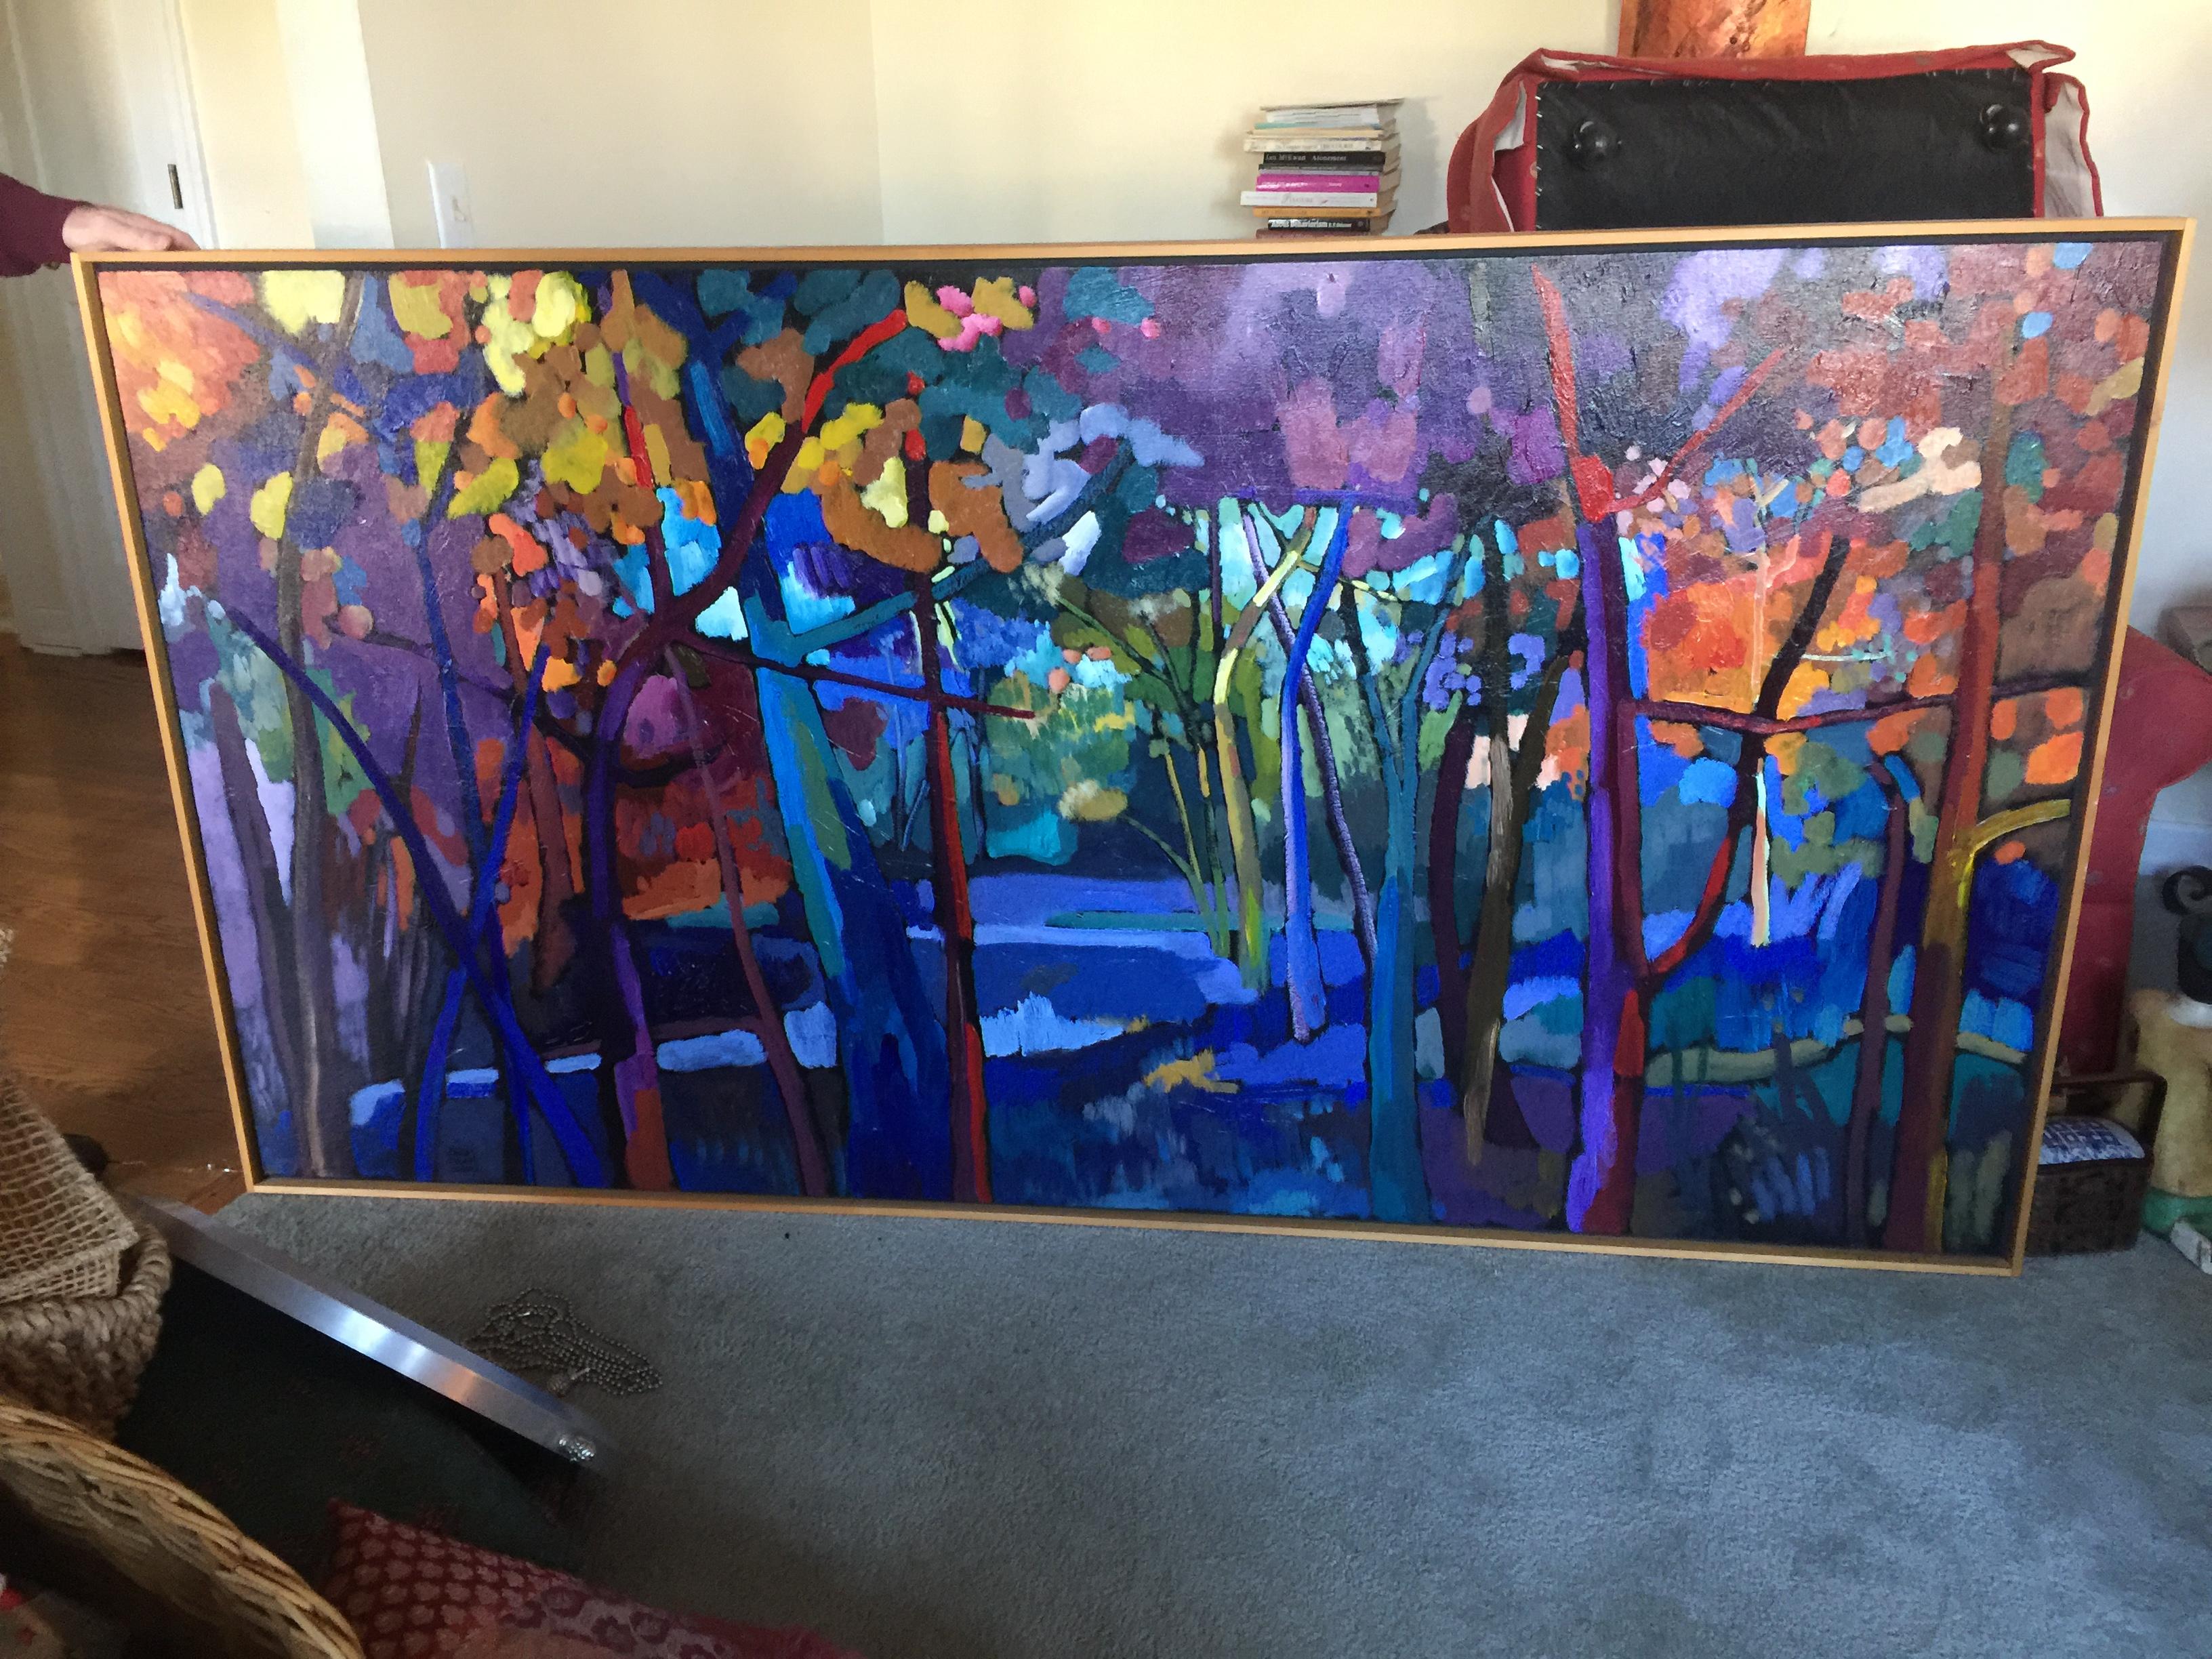 80"x42" Oil on Canvas painting by Russ Vogt